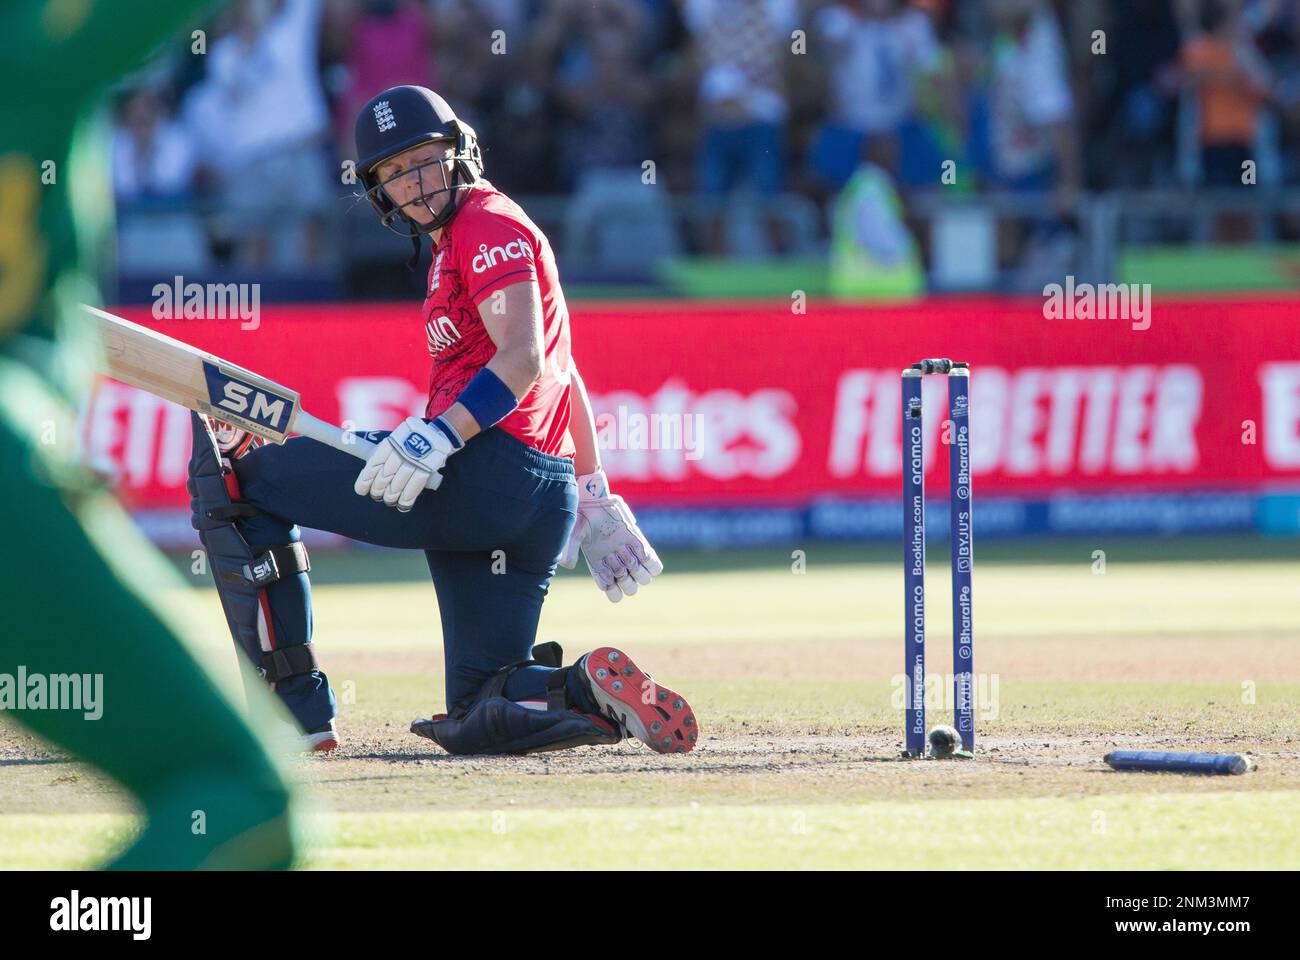 Englands Heather Knight is bowled out against South Africa during the Womens T20 World Cup semi final cricket match in Cape Town, South Africa, Friday Feb